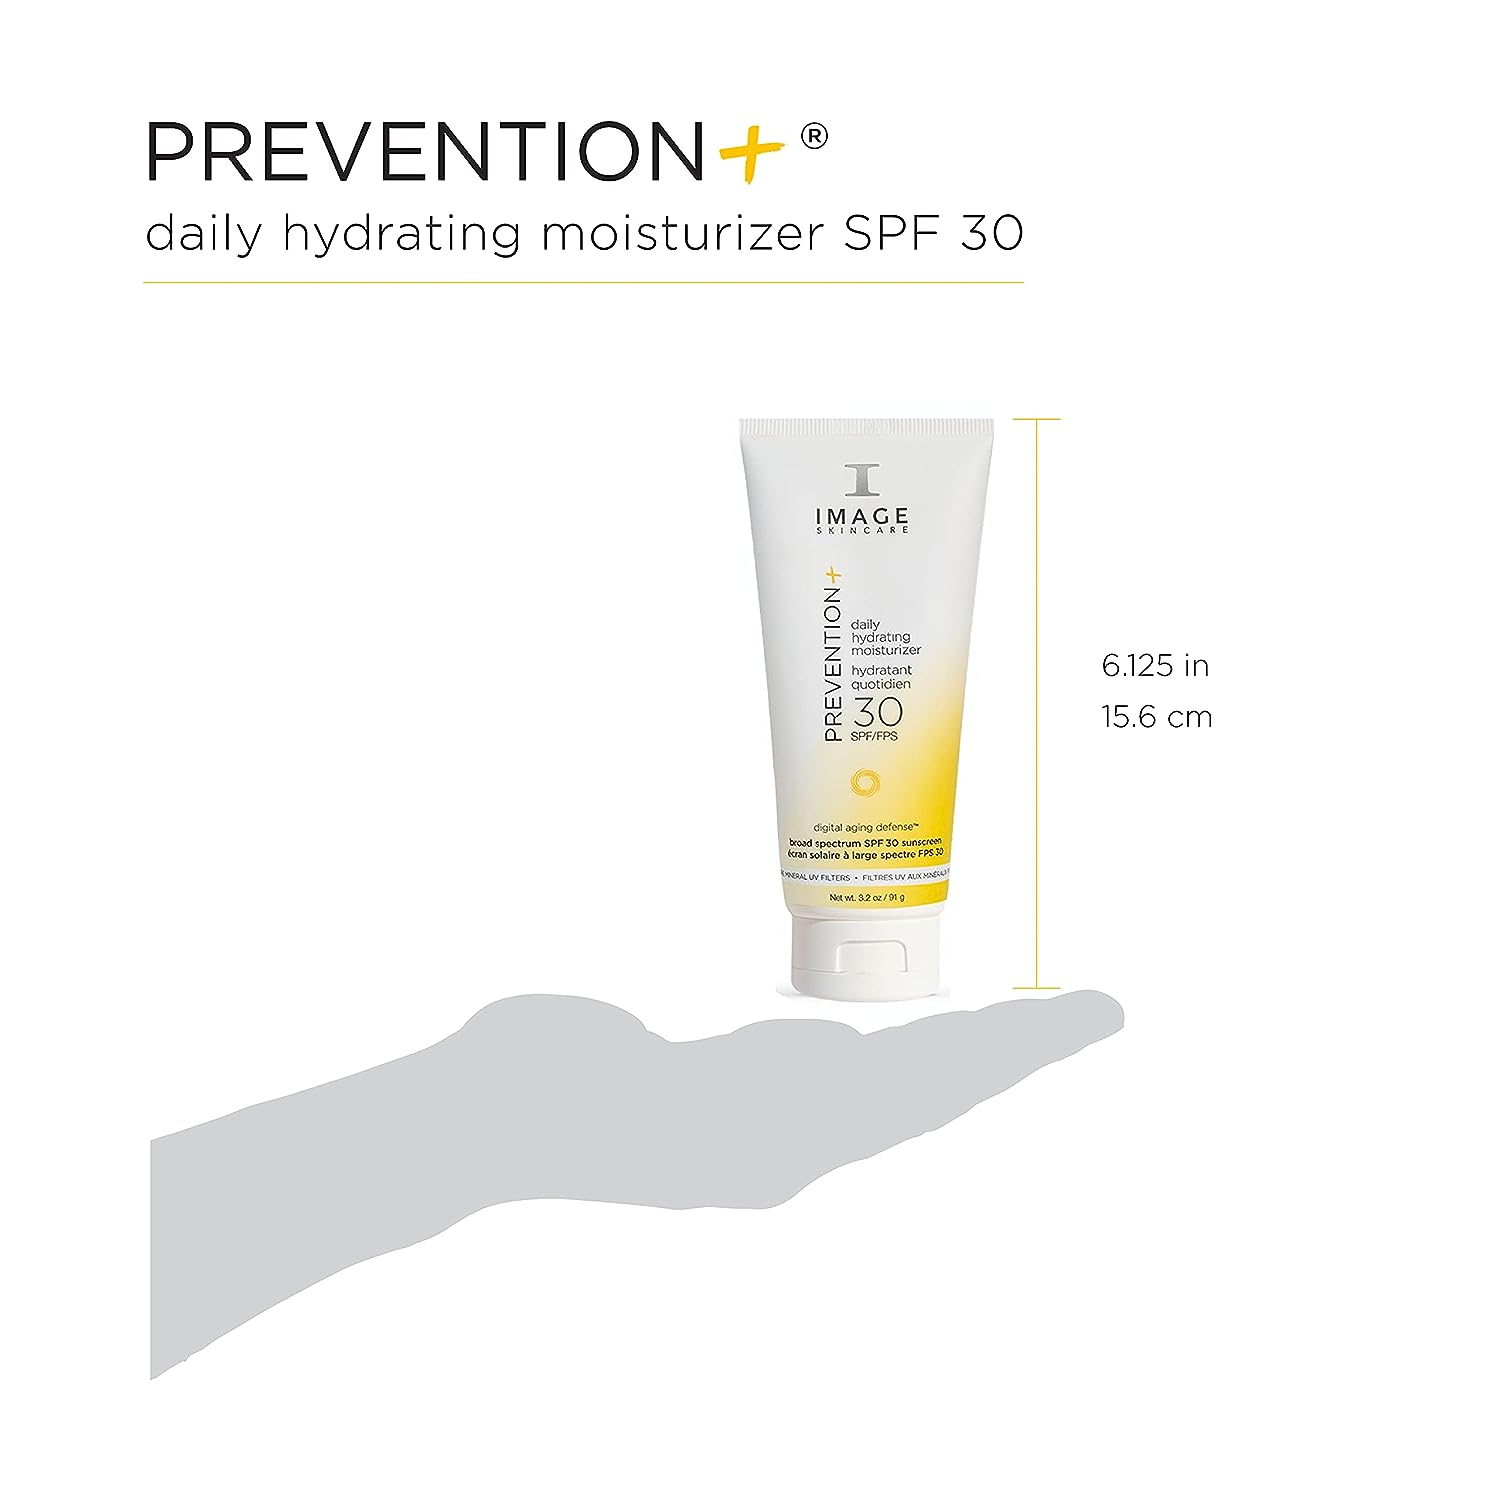 Image Skincare Prevention Daily Hydrating Moisturizer + Aging Defence Broad Spectrum SPF 30, 3.2 oz - image 6 of 9